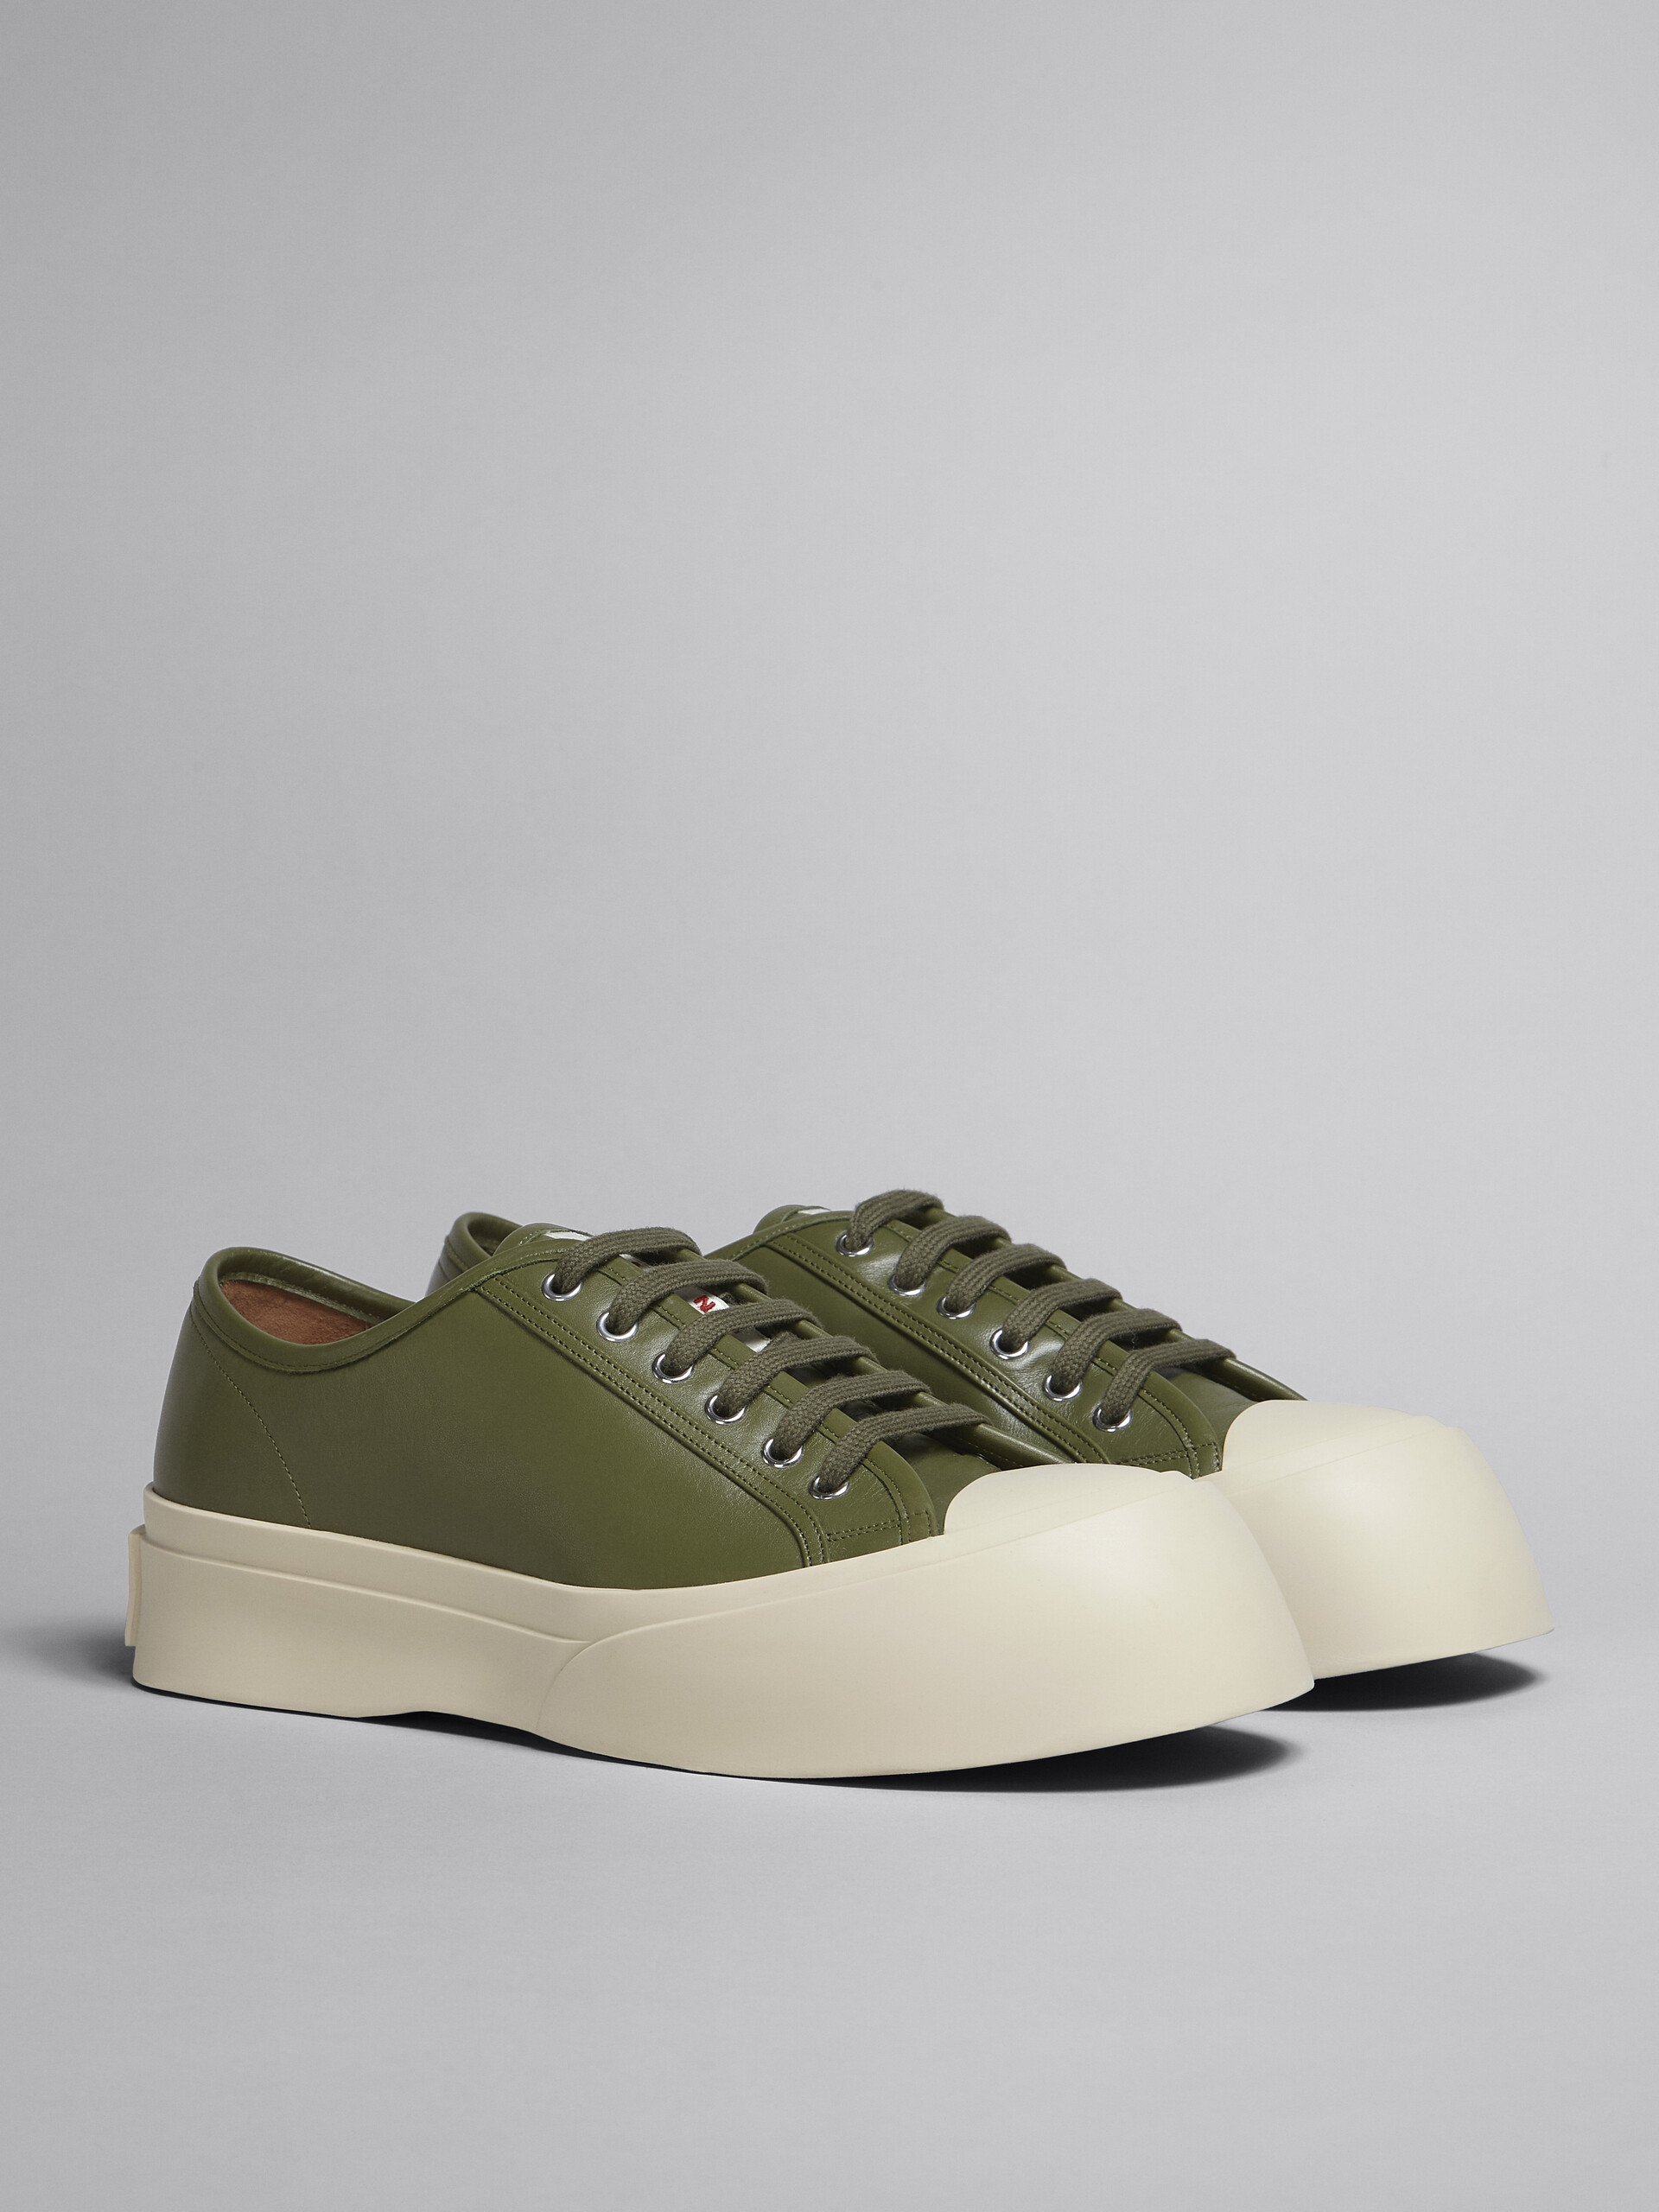 Green soft calf leather PABLO sneaker - Sneakers - Image 2